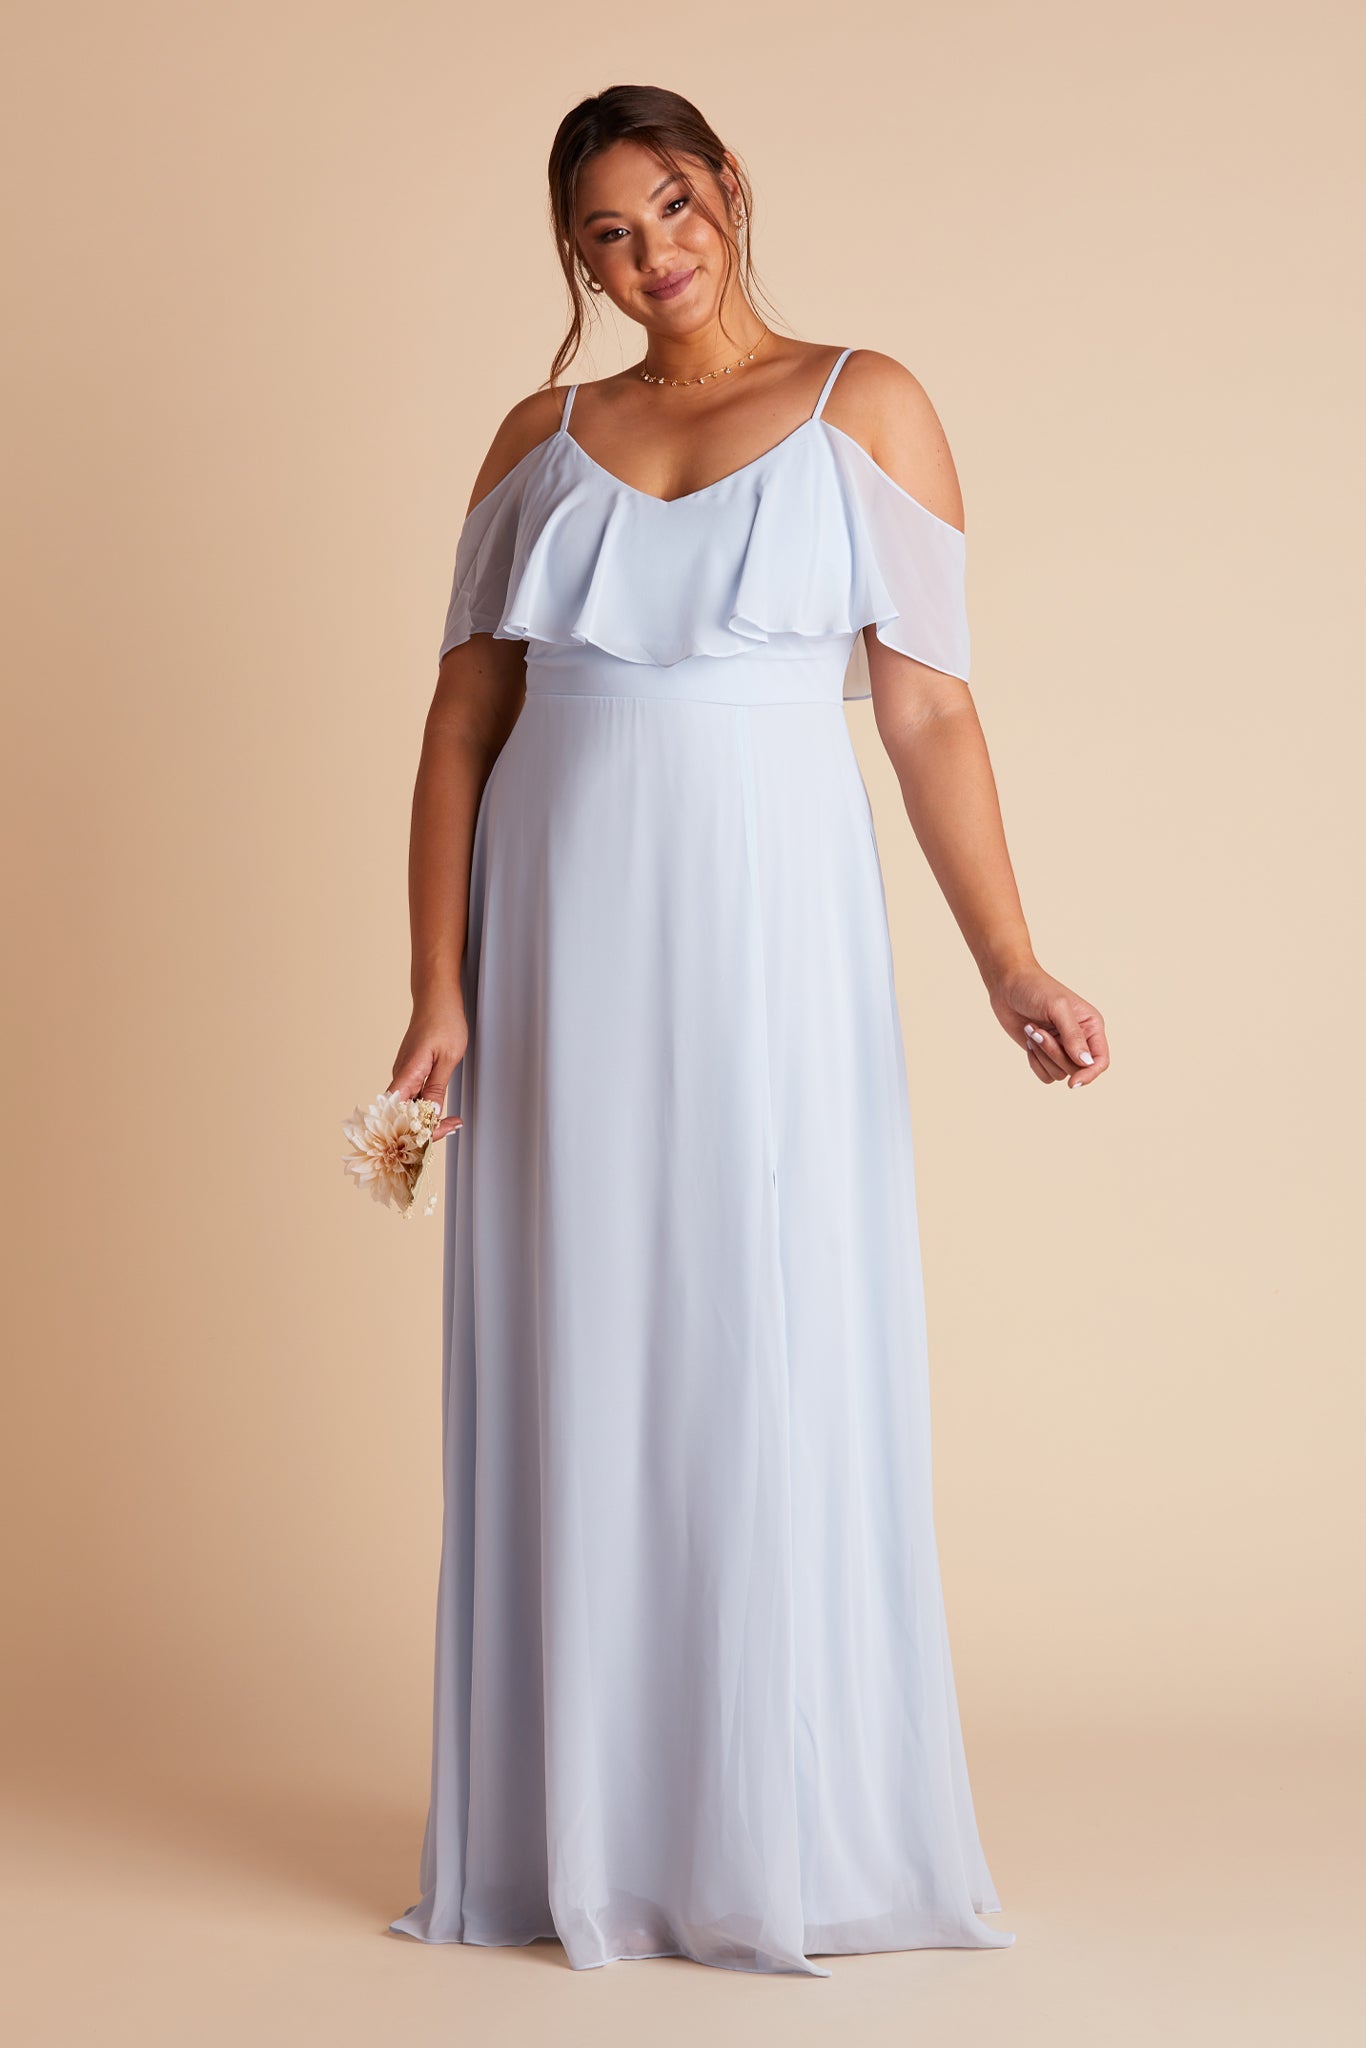 Jane convertible plus size bridesmaid dress in ice blue chiffon by Birdy Grey, front view